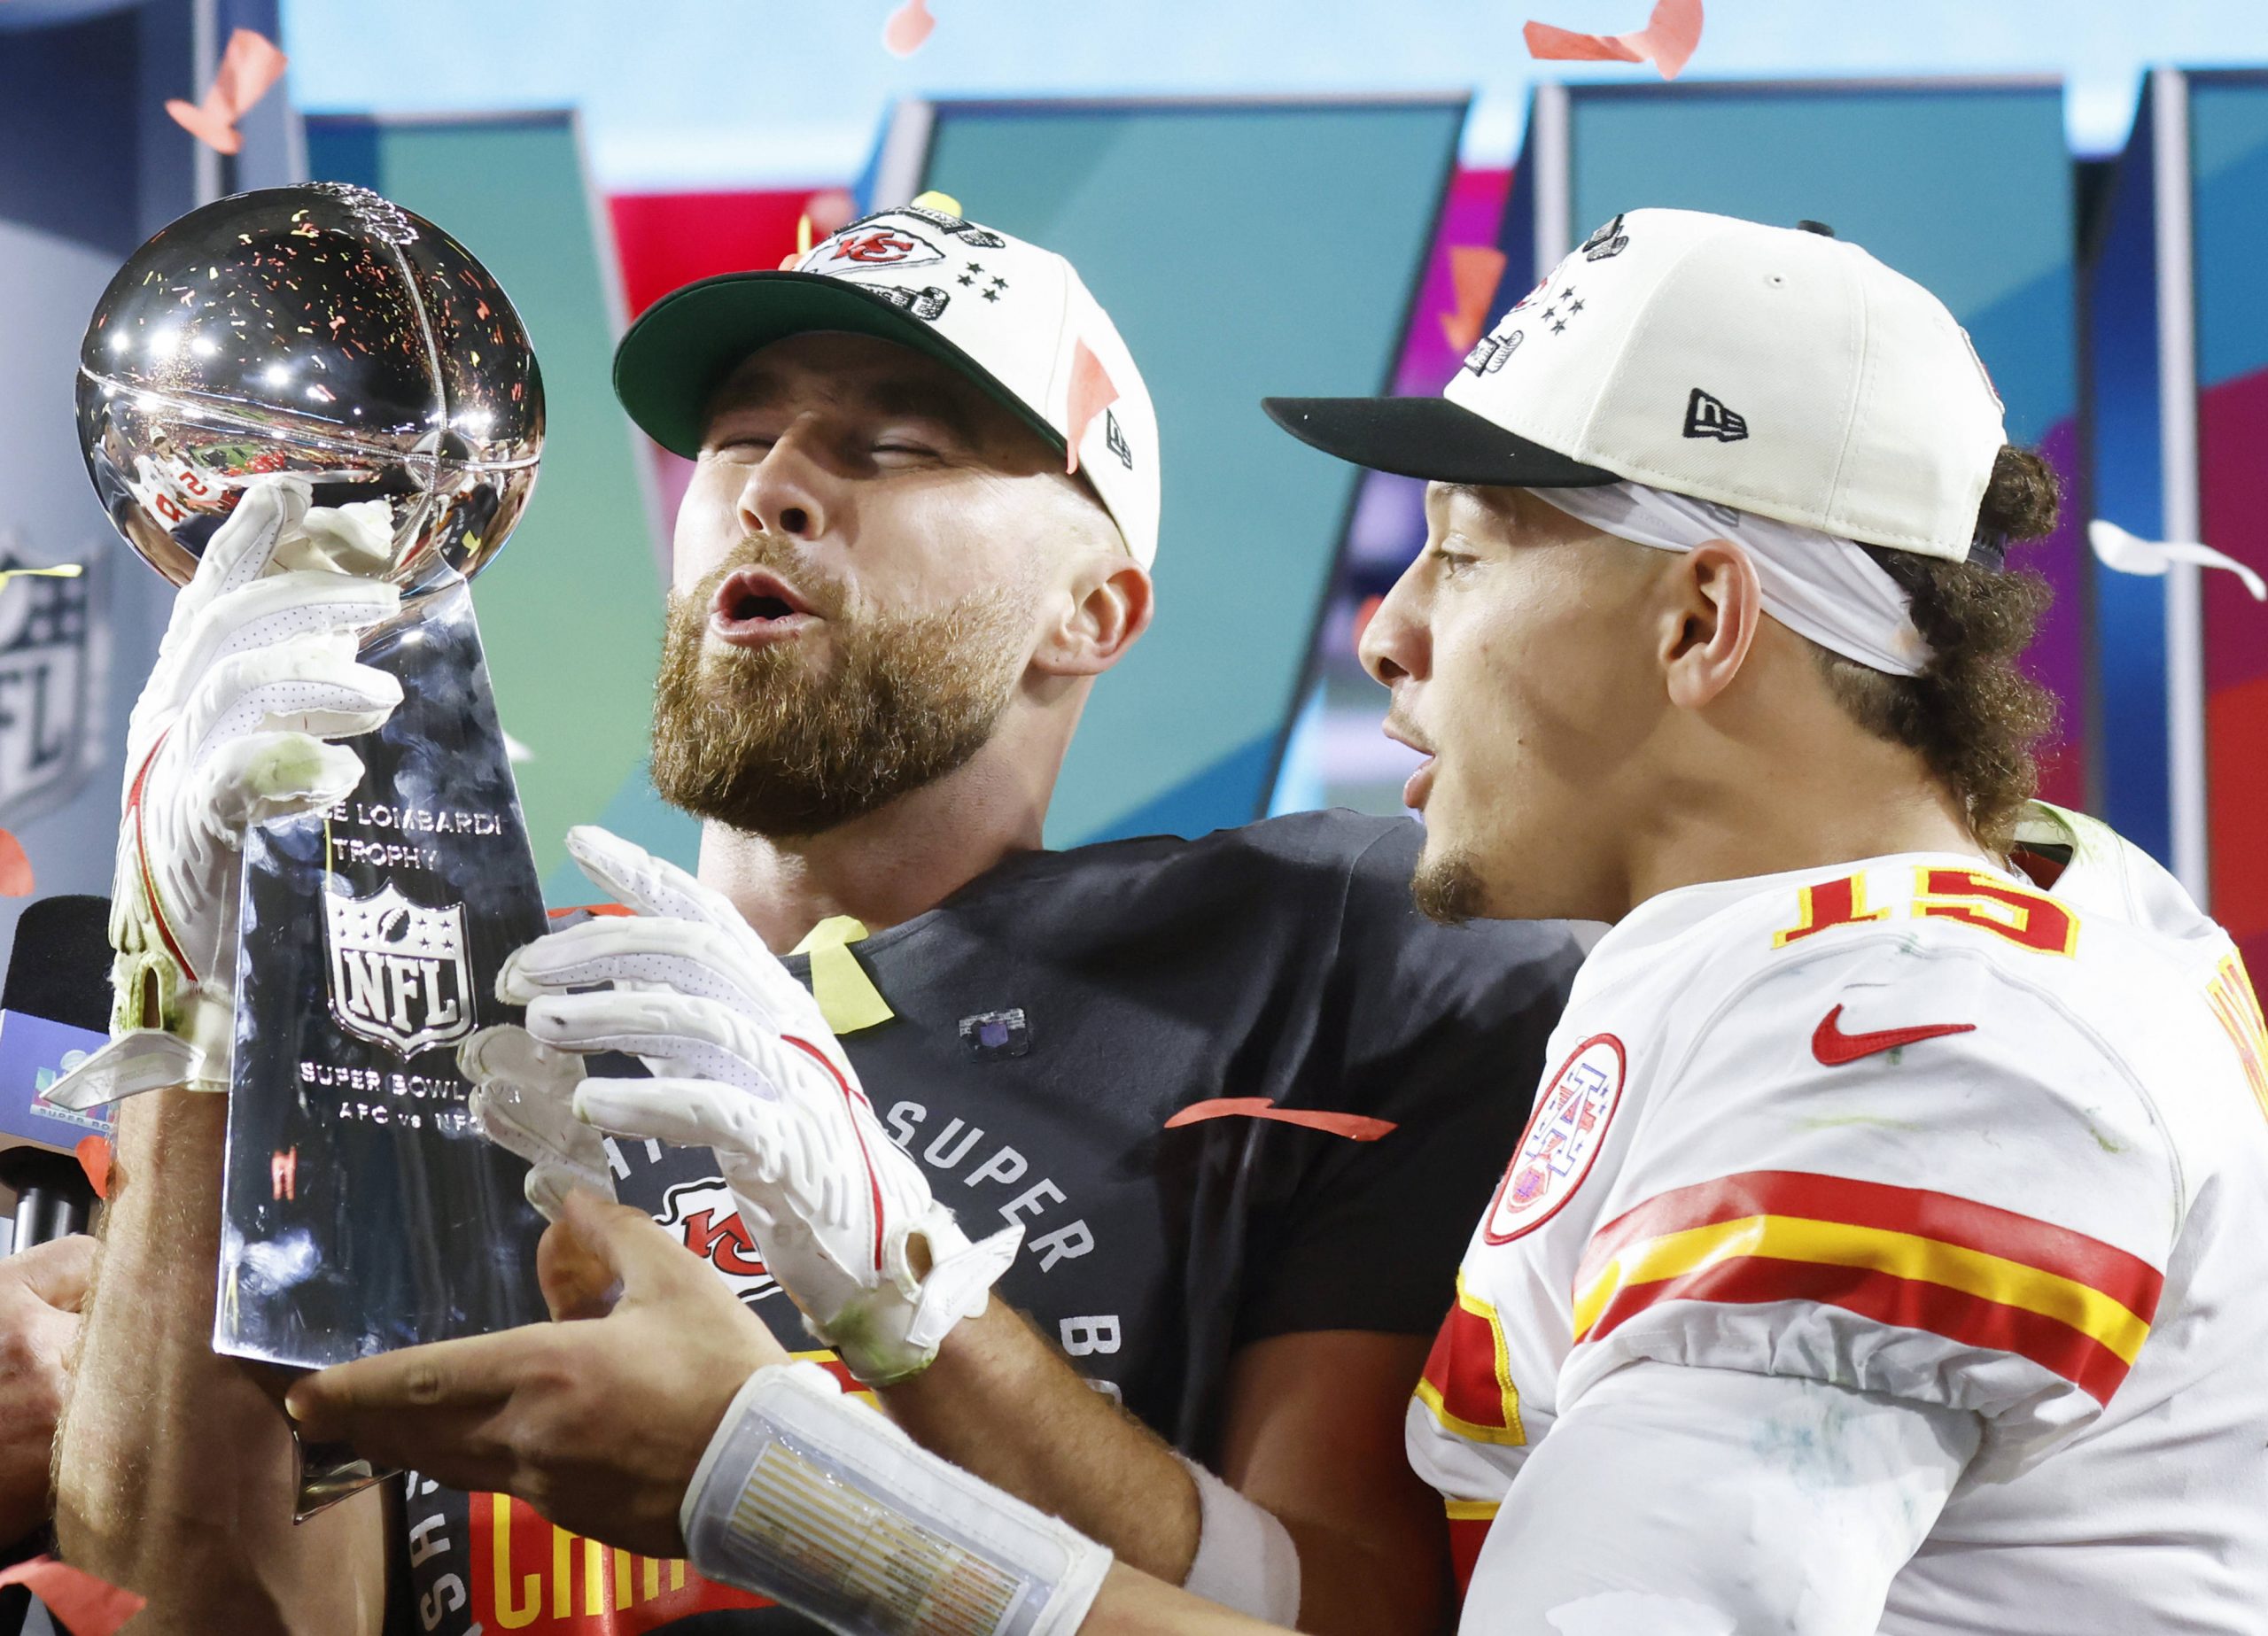 US-TV-Landschaft - NFL Kickoff 2023 - Kansas City Chiefs quarterback Patrick Mahomes 15 and tight end Travis Kelce celebrate with the the Lombardi Trophy after winning Super Bowl LVII 38-35 over the Philadelphia Eagles at State Farm Stadium in Glendale, Arizona, on Sunday, February 12, 2023. PUBLICATIONxINxGERxSUIxAUTxHUNxONLY SBP202302121054 JOHNxANGELILLO